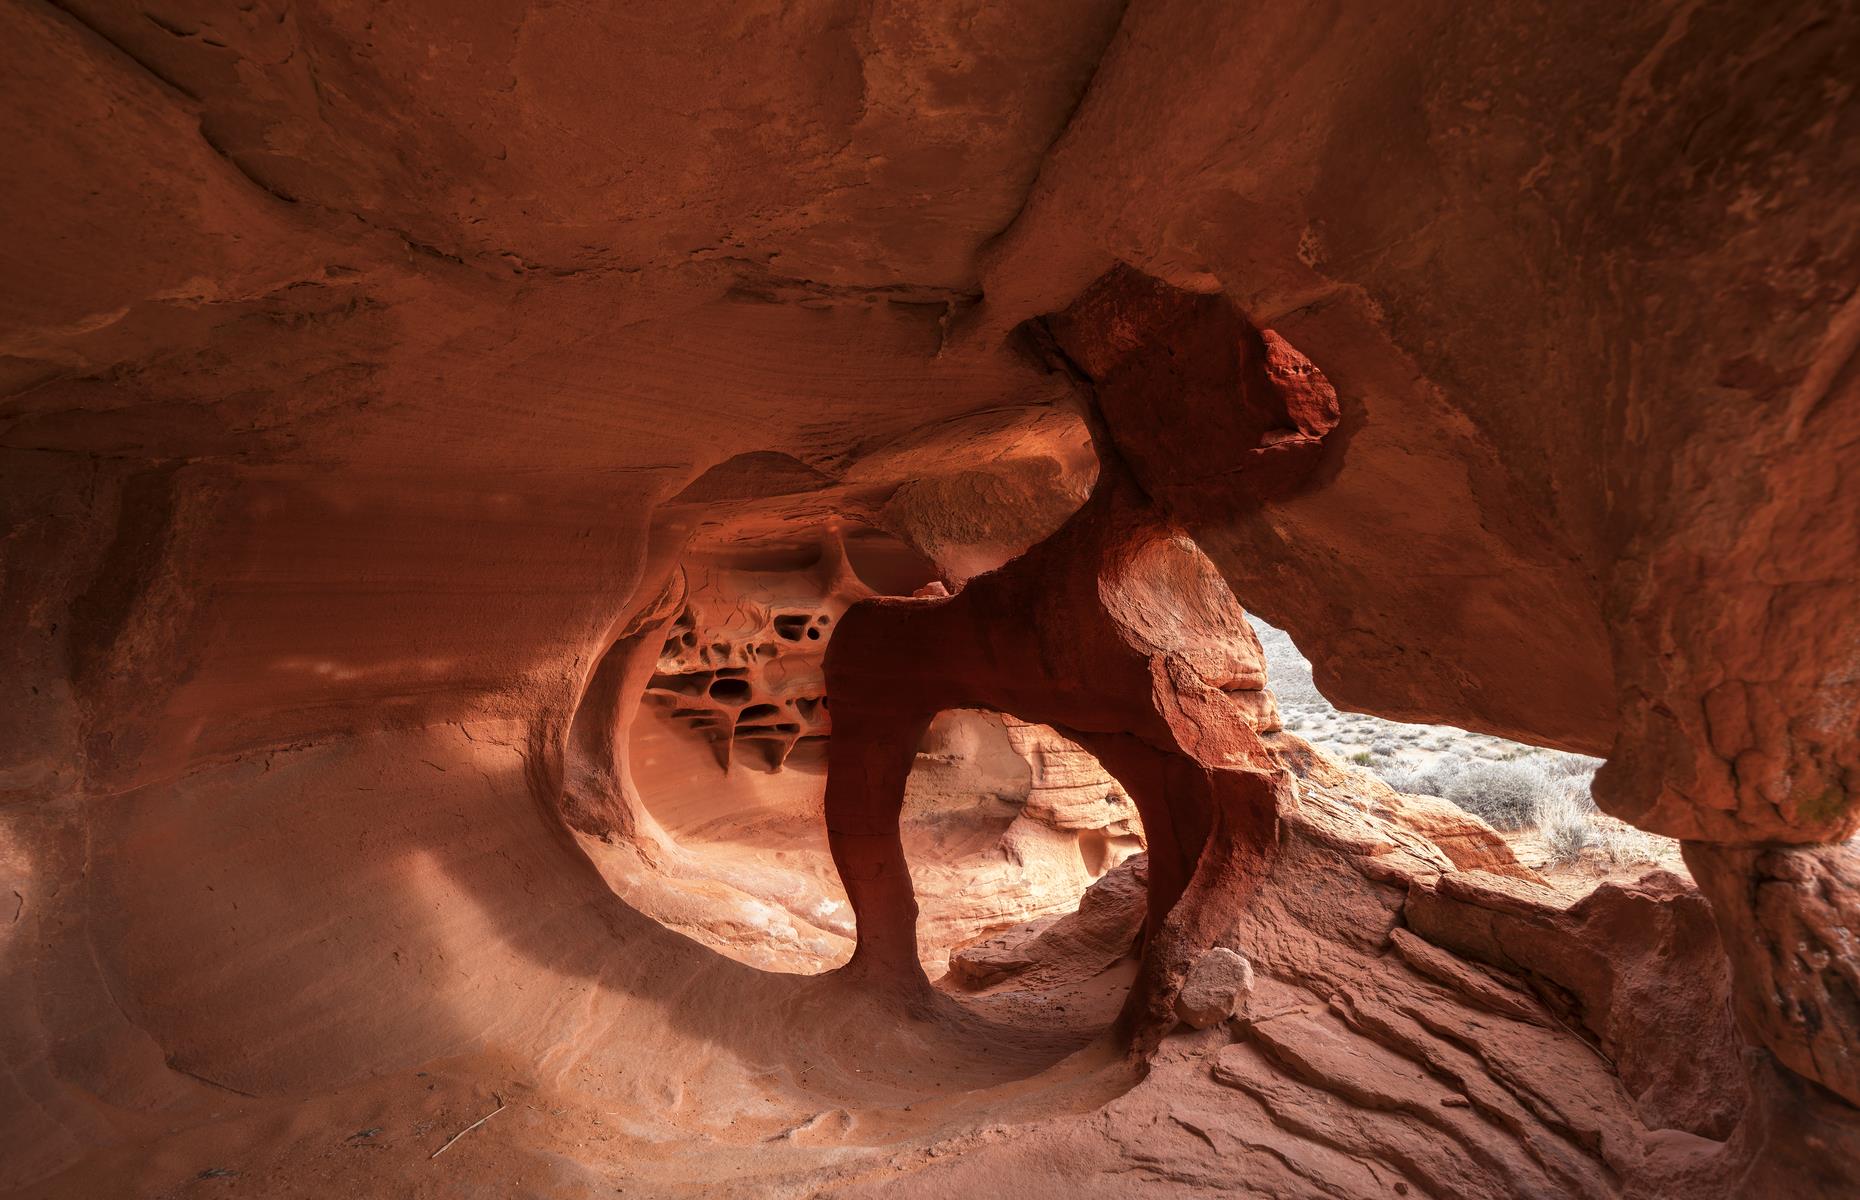 <p>This rusty red cavern is only four-foot (1.2m) wide and deep, but its vibrant color and otherworldly rock formations certainly pack a punch. Tucked away down a dirt track in Nevada’s <a href="http://parks.nv.gov/parks/valley-of-fire">Valley of Fire State Park</a>, the sandstone rock has slowly been eroded by wind, forming the Windstone Arch and alien-like shapes. If you want to see it for yourself, check the GPS co-ordinates as it isn’t easy to find.</p>